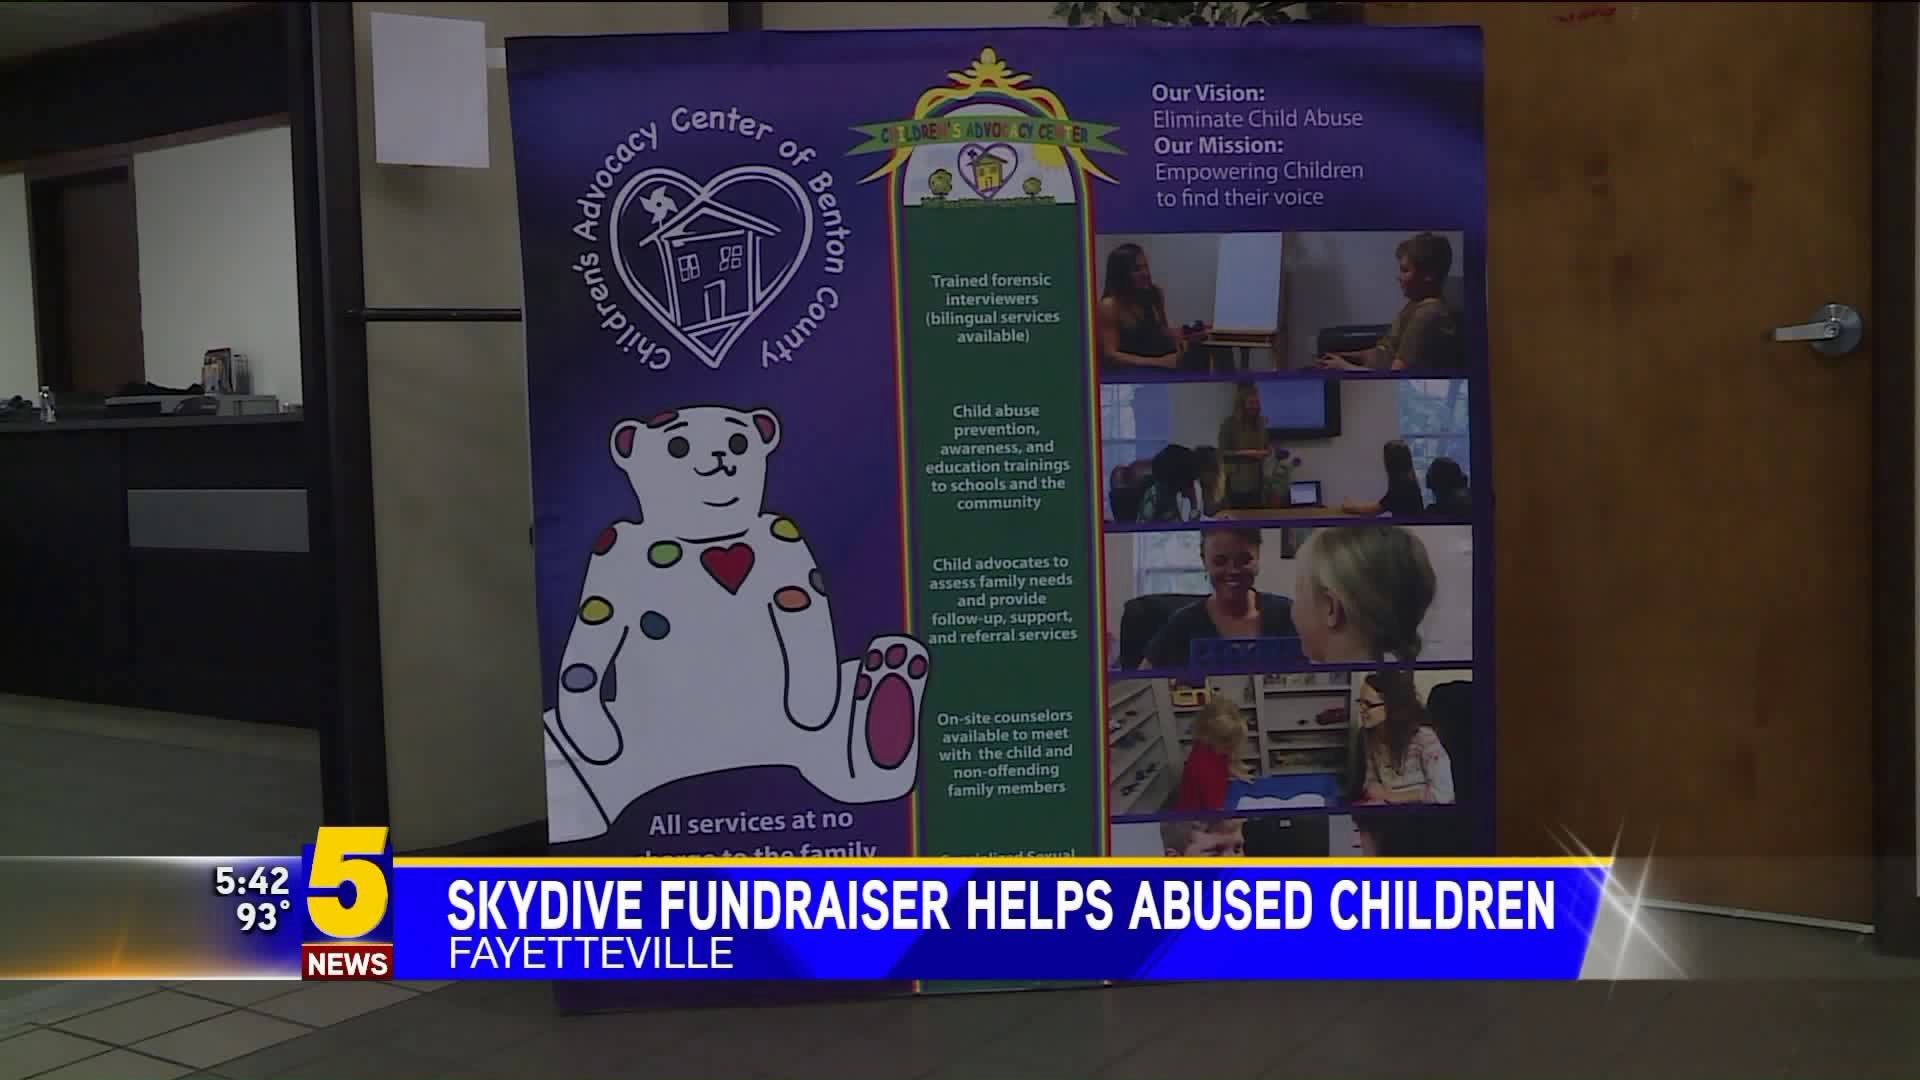 Fundraiser To Curb Child Abuse